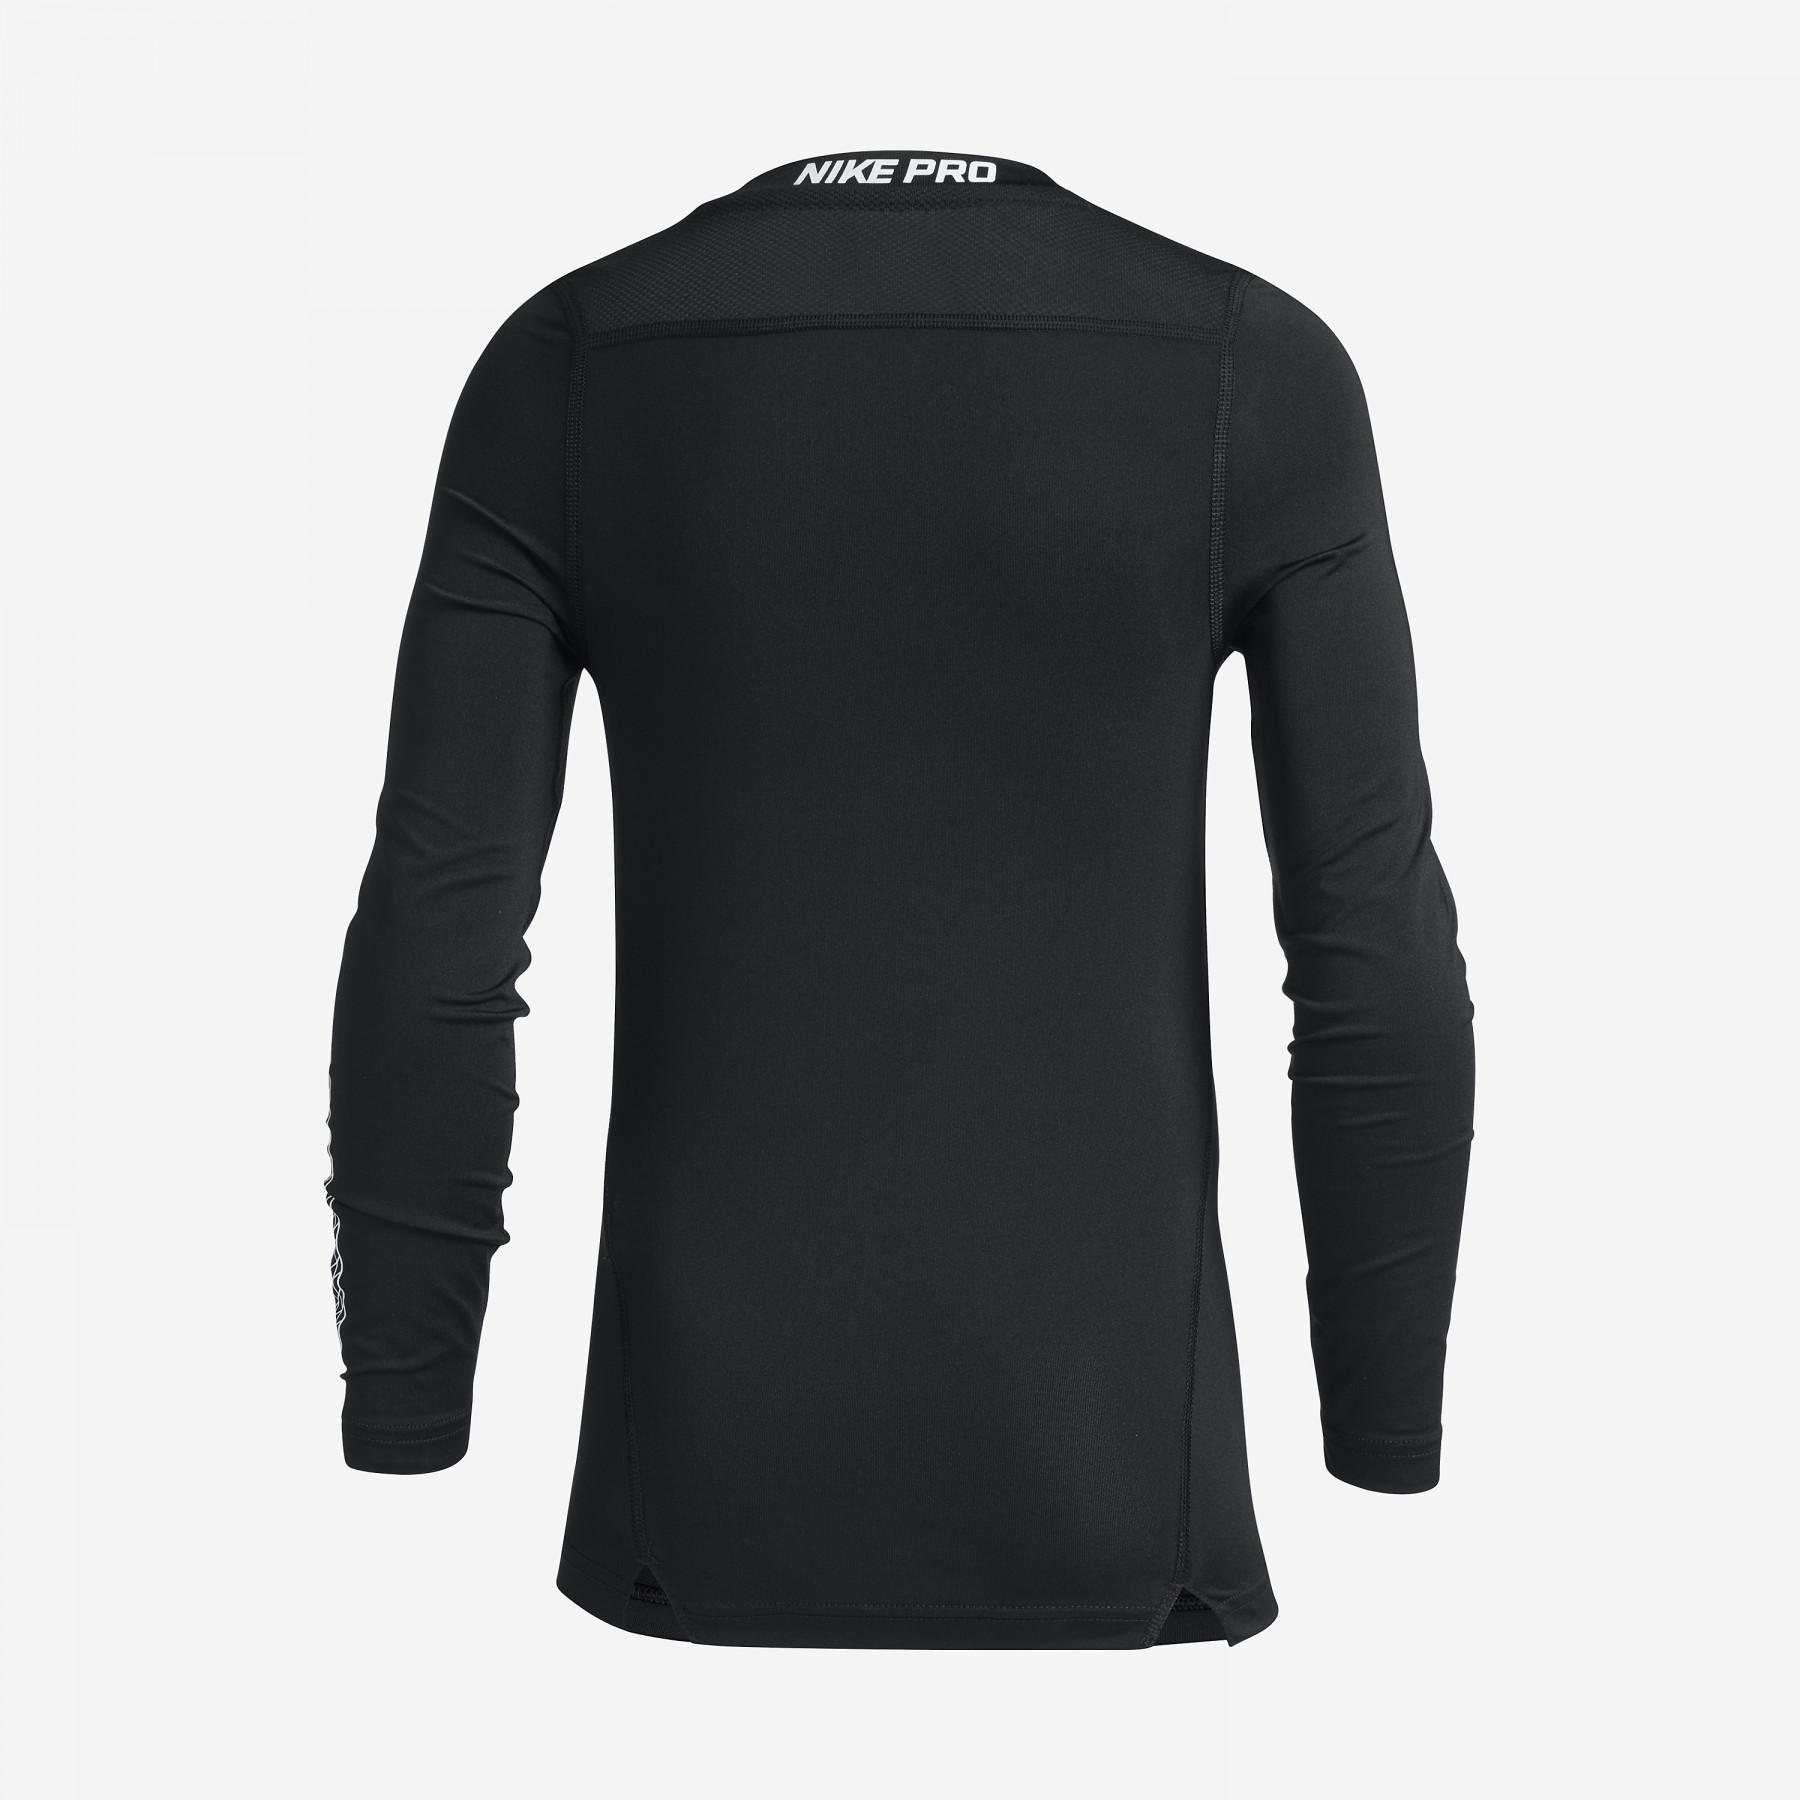 Children's long sleeve compression jersey Nike Pro